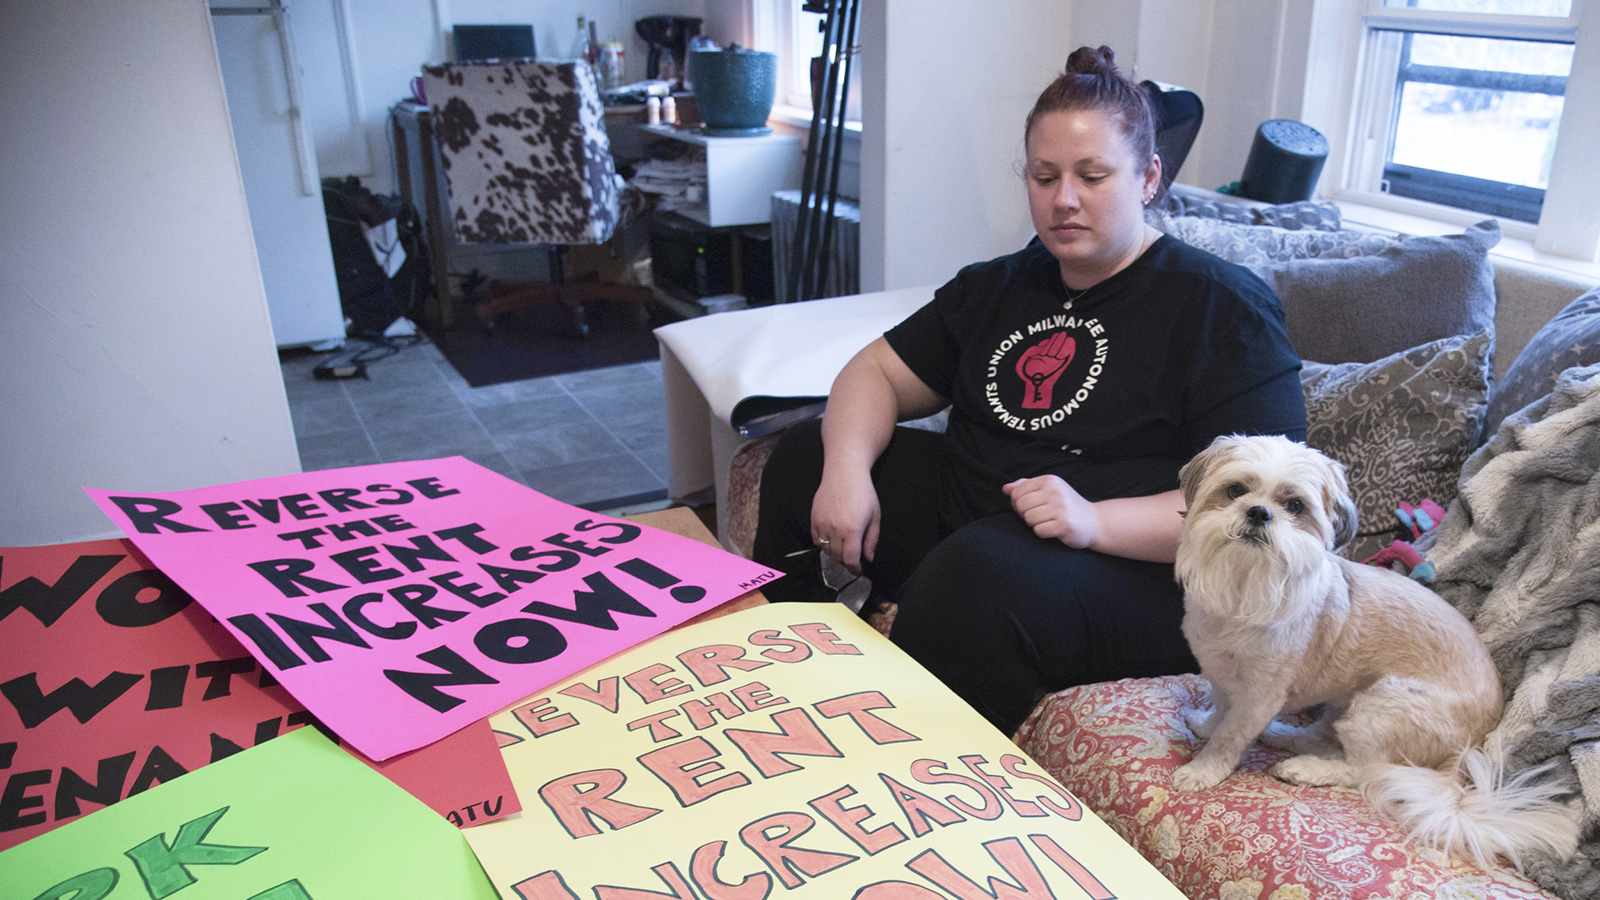 Karianne and a dog sit on a couch facing table with protest signs